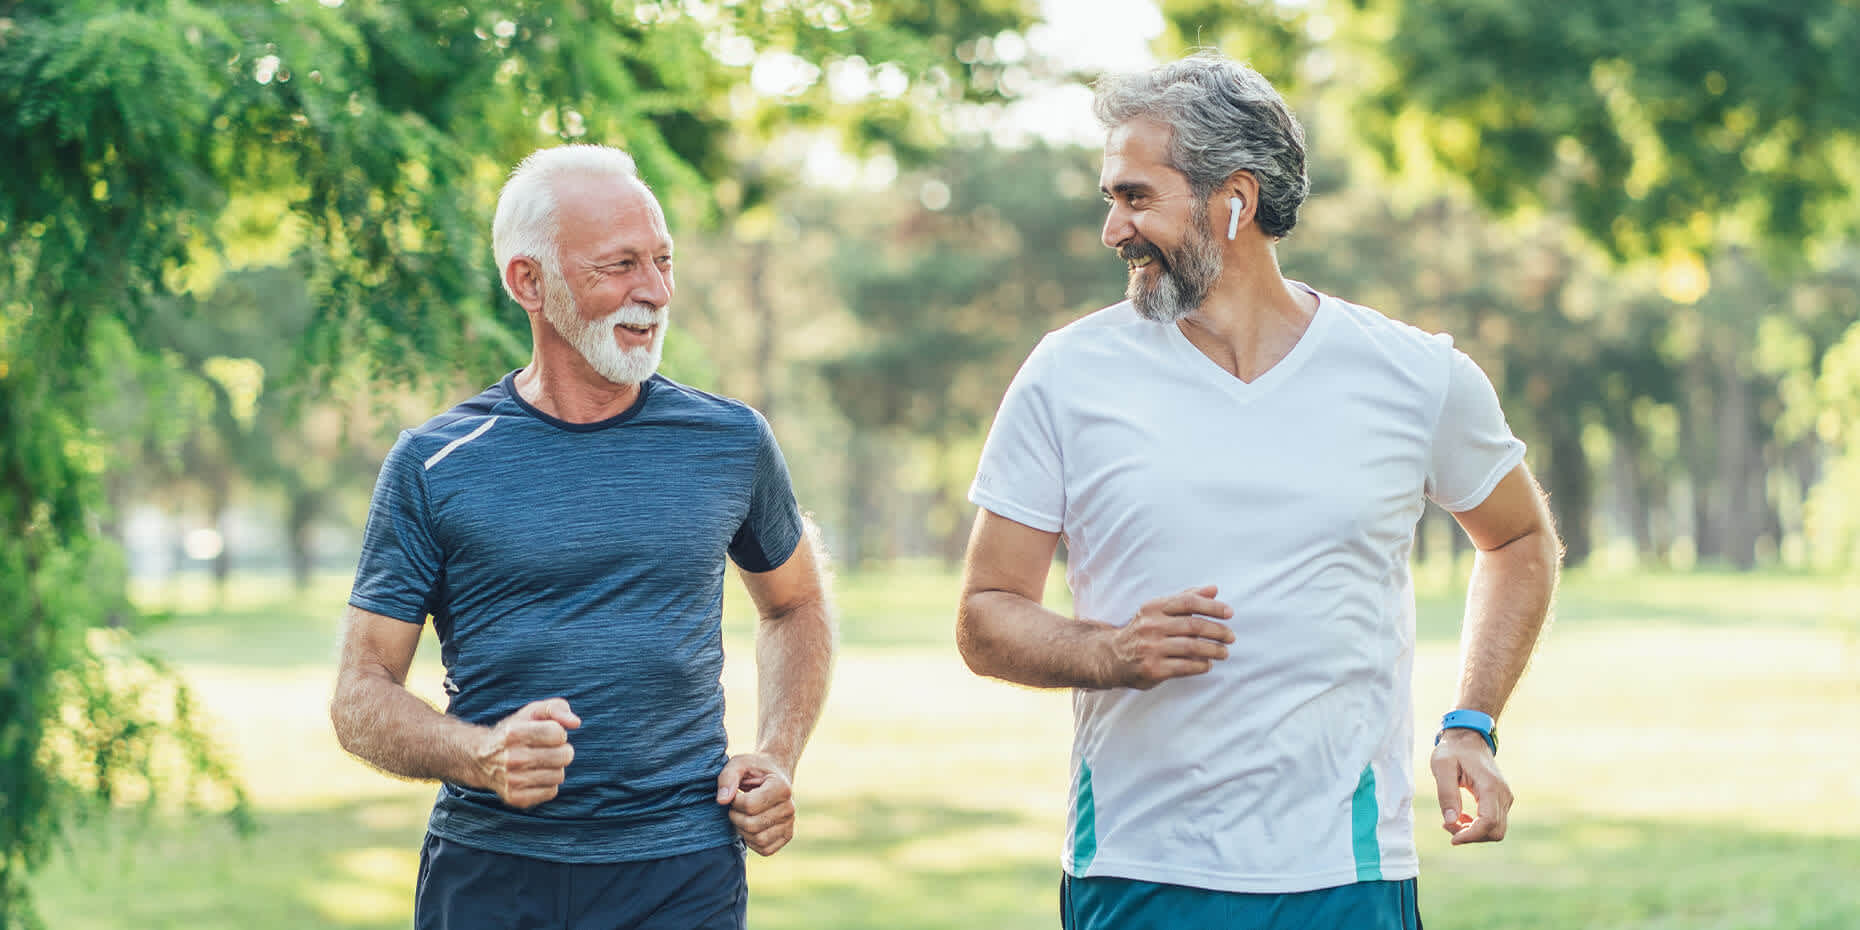 Two men jogging while talking about cancer screening for preventative healthcare